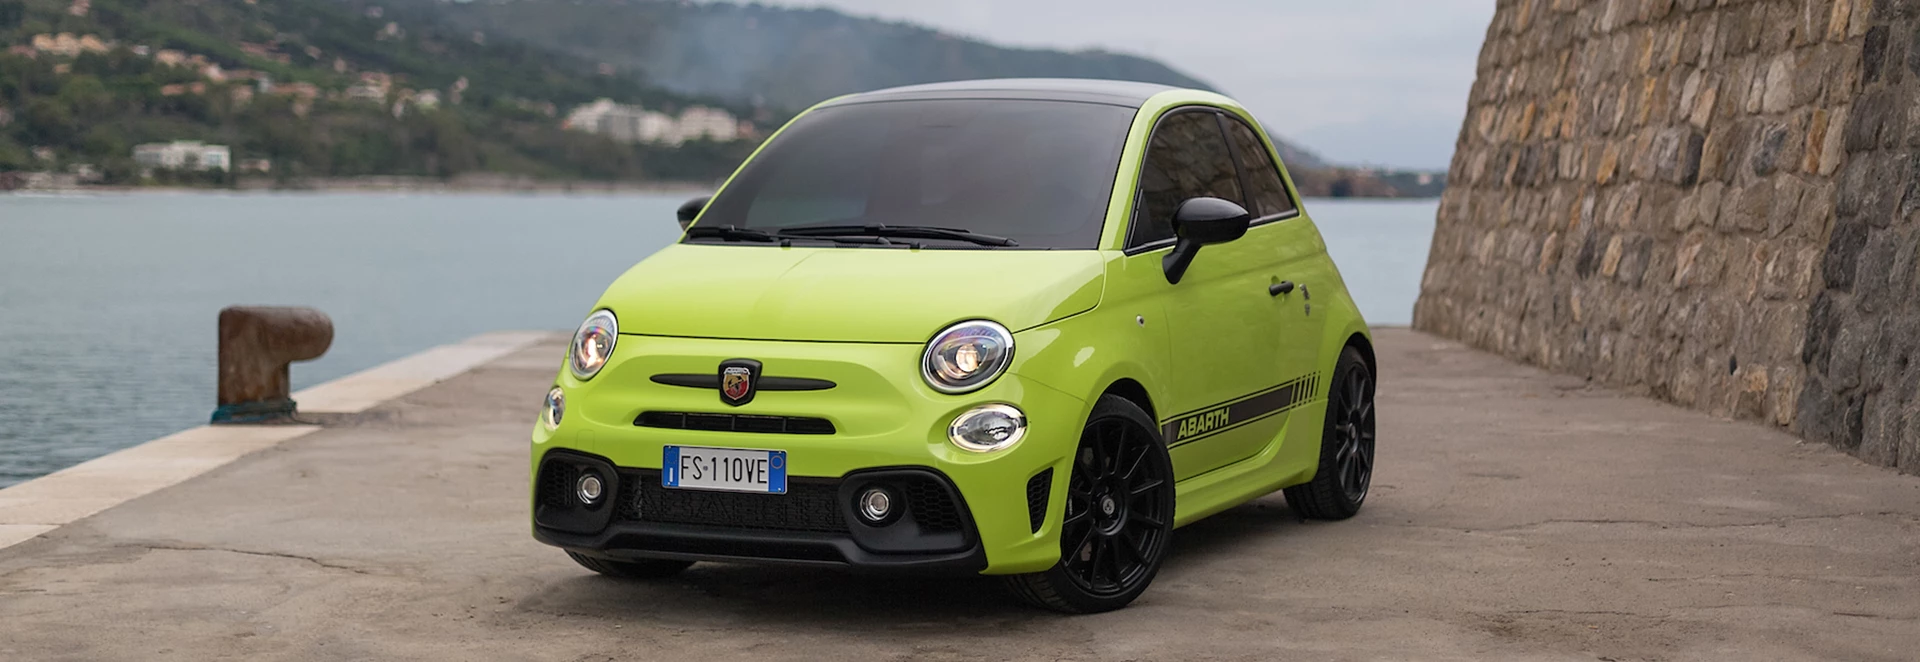 Buyer’s guide to the 2021 Abarth 595 